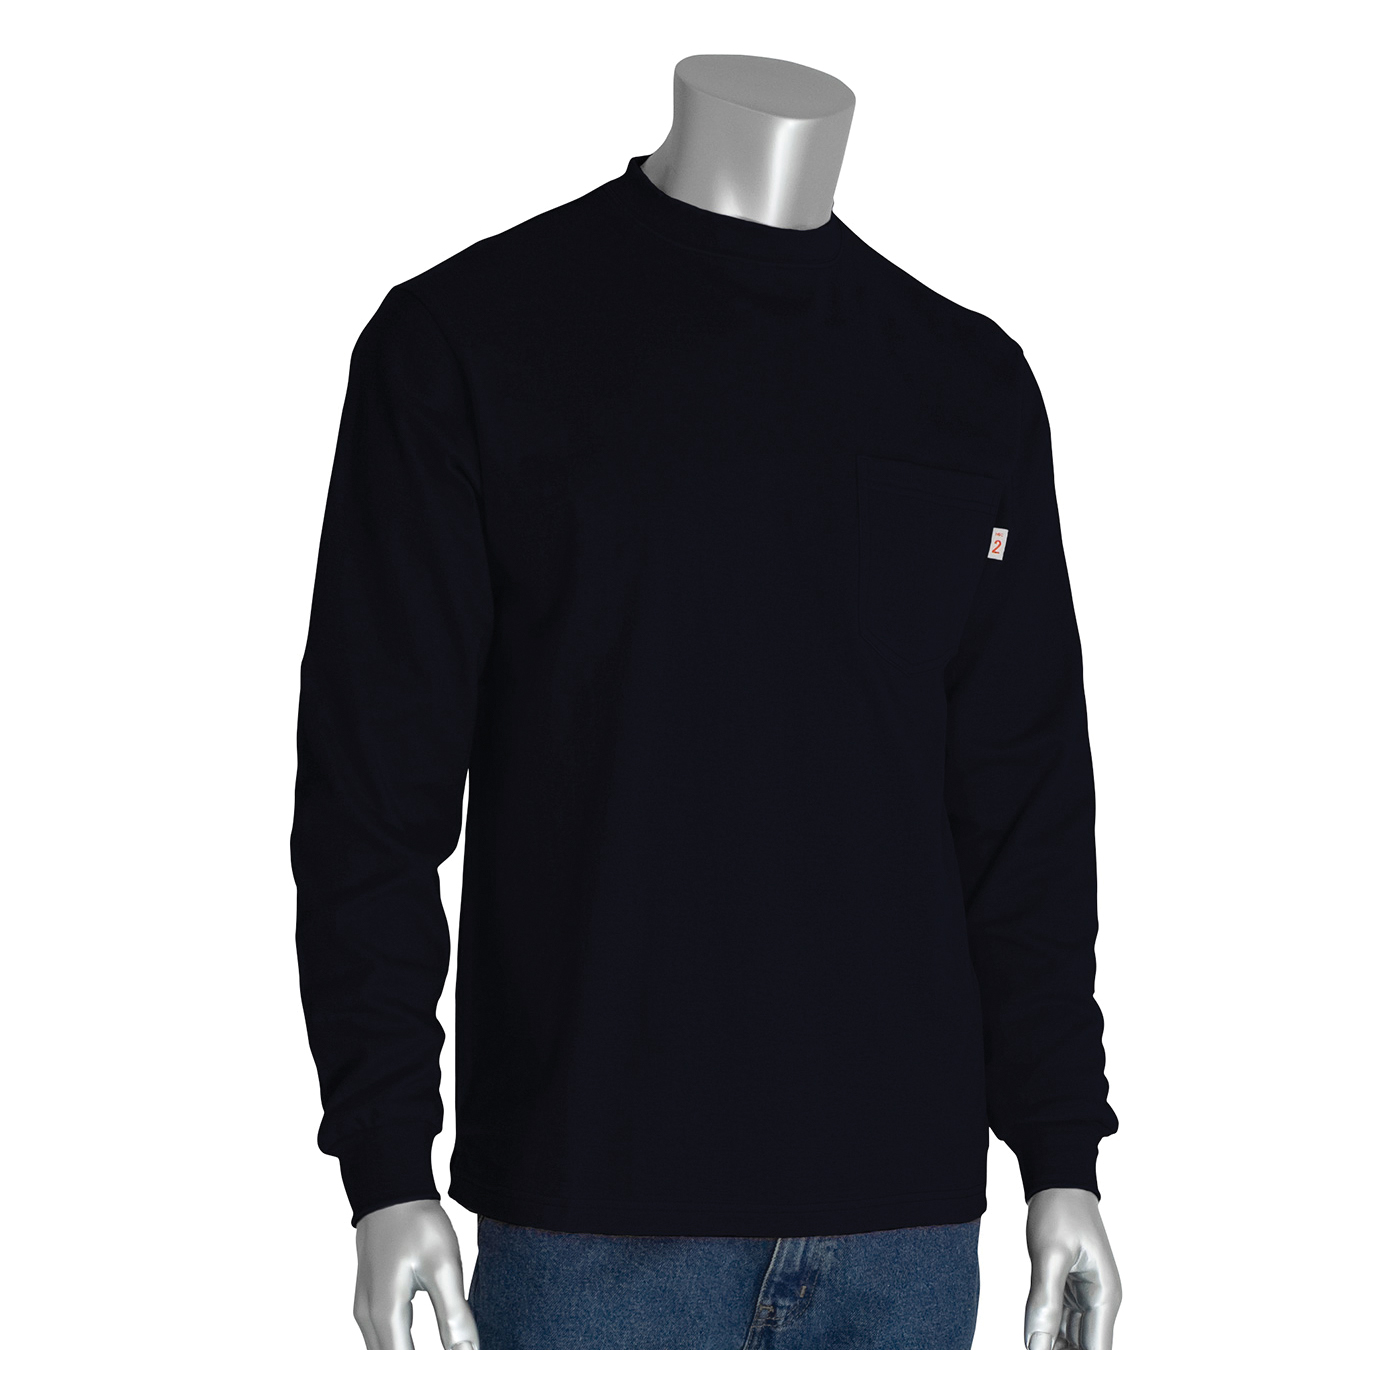 PIP® 385-FRLS-(NV)-2X Arc and Flame-Resistant Long Sleeve T-Shirt, 2XL, Navy, Cotton Interlock Knit, 33-1/2 in L